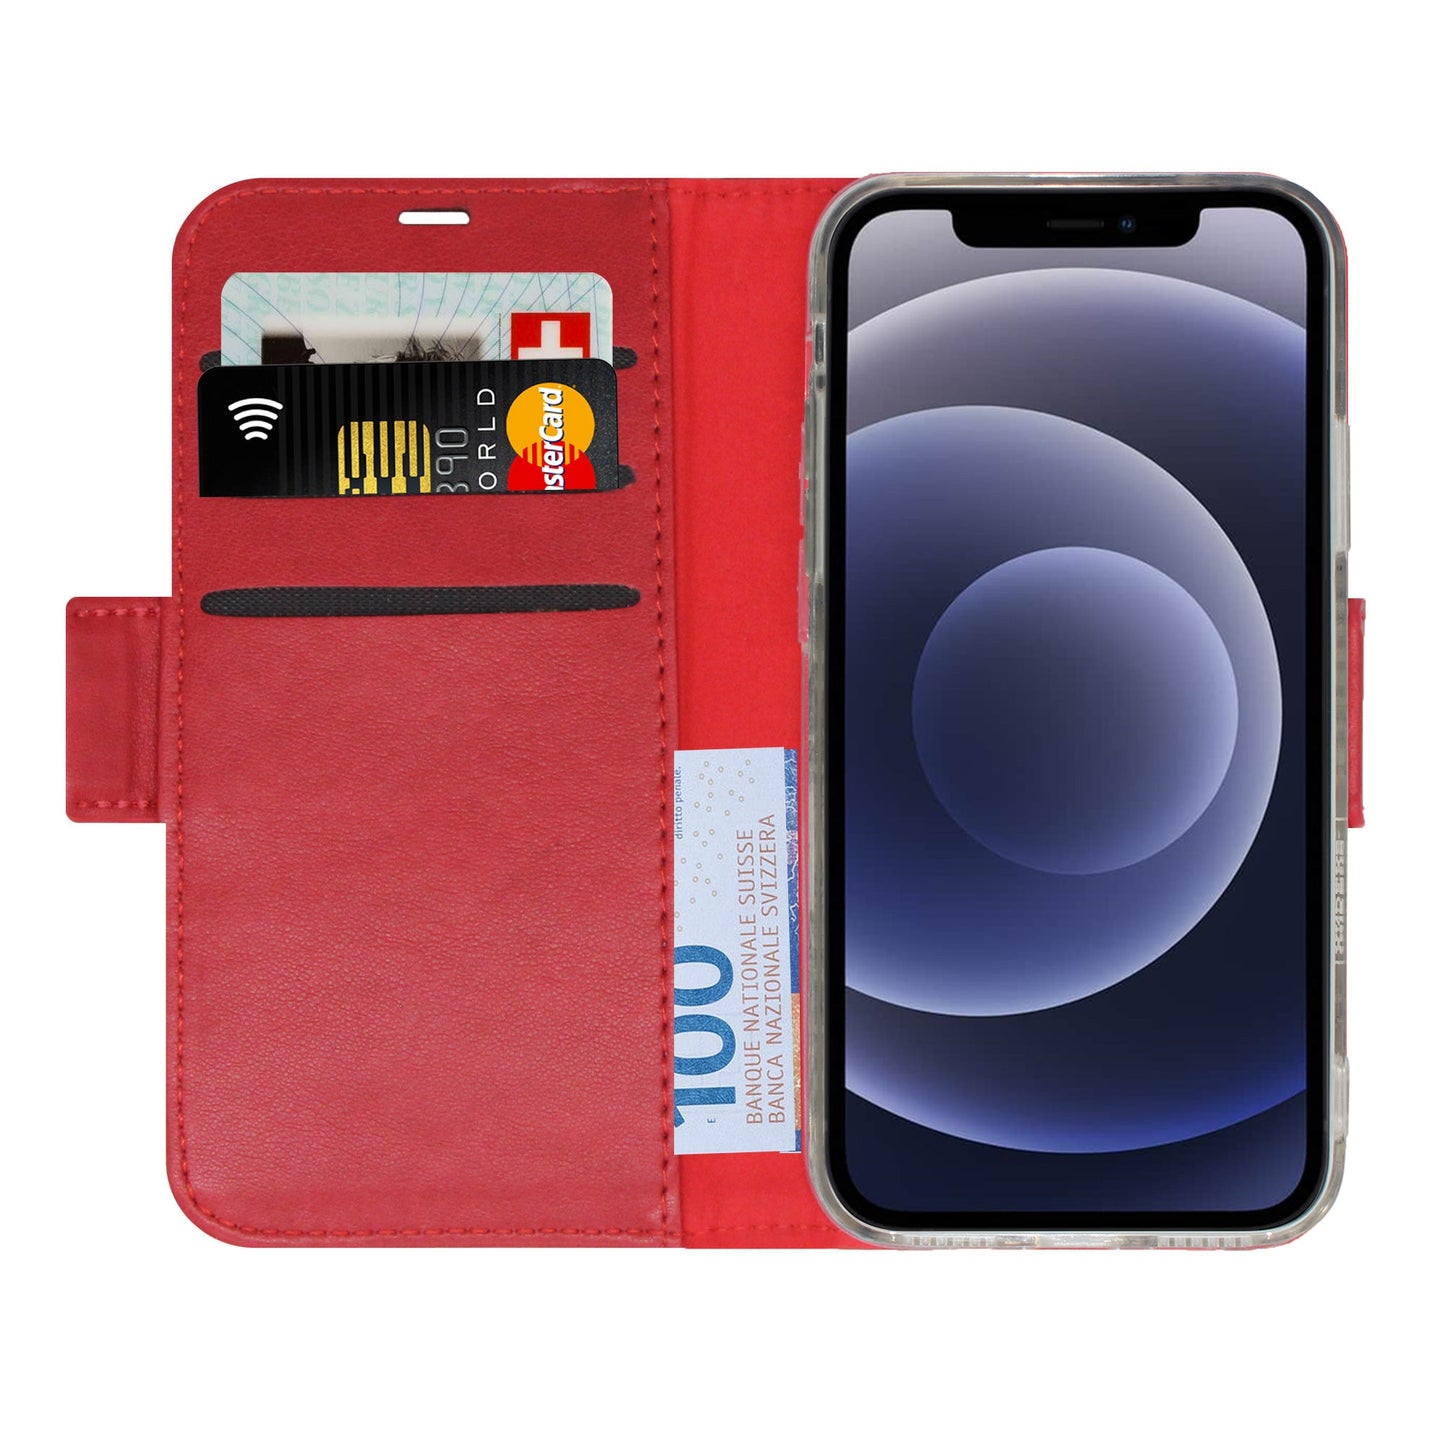 Uni Red Victor Case for iPhone X/XS